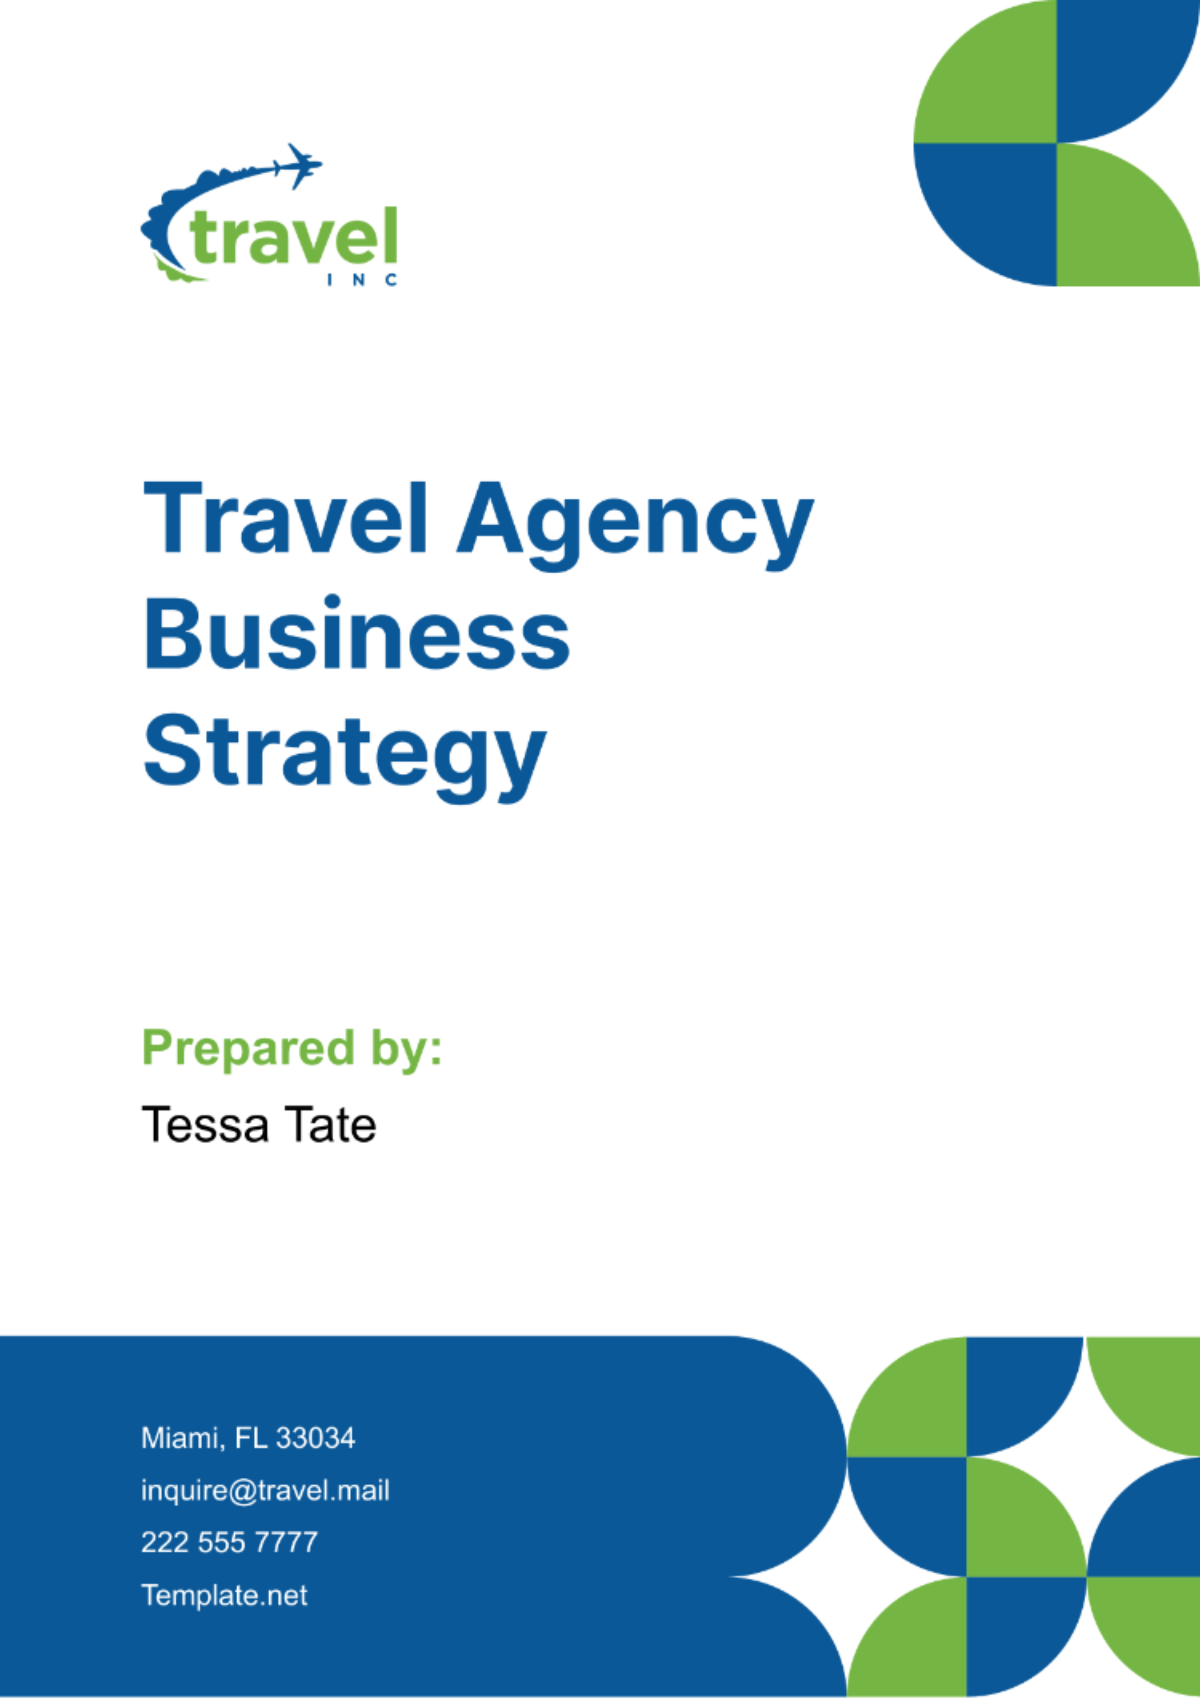 Travel Agency Business Strategy Template